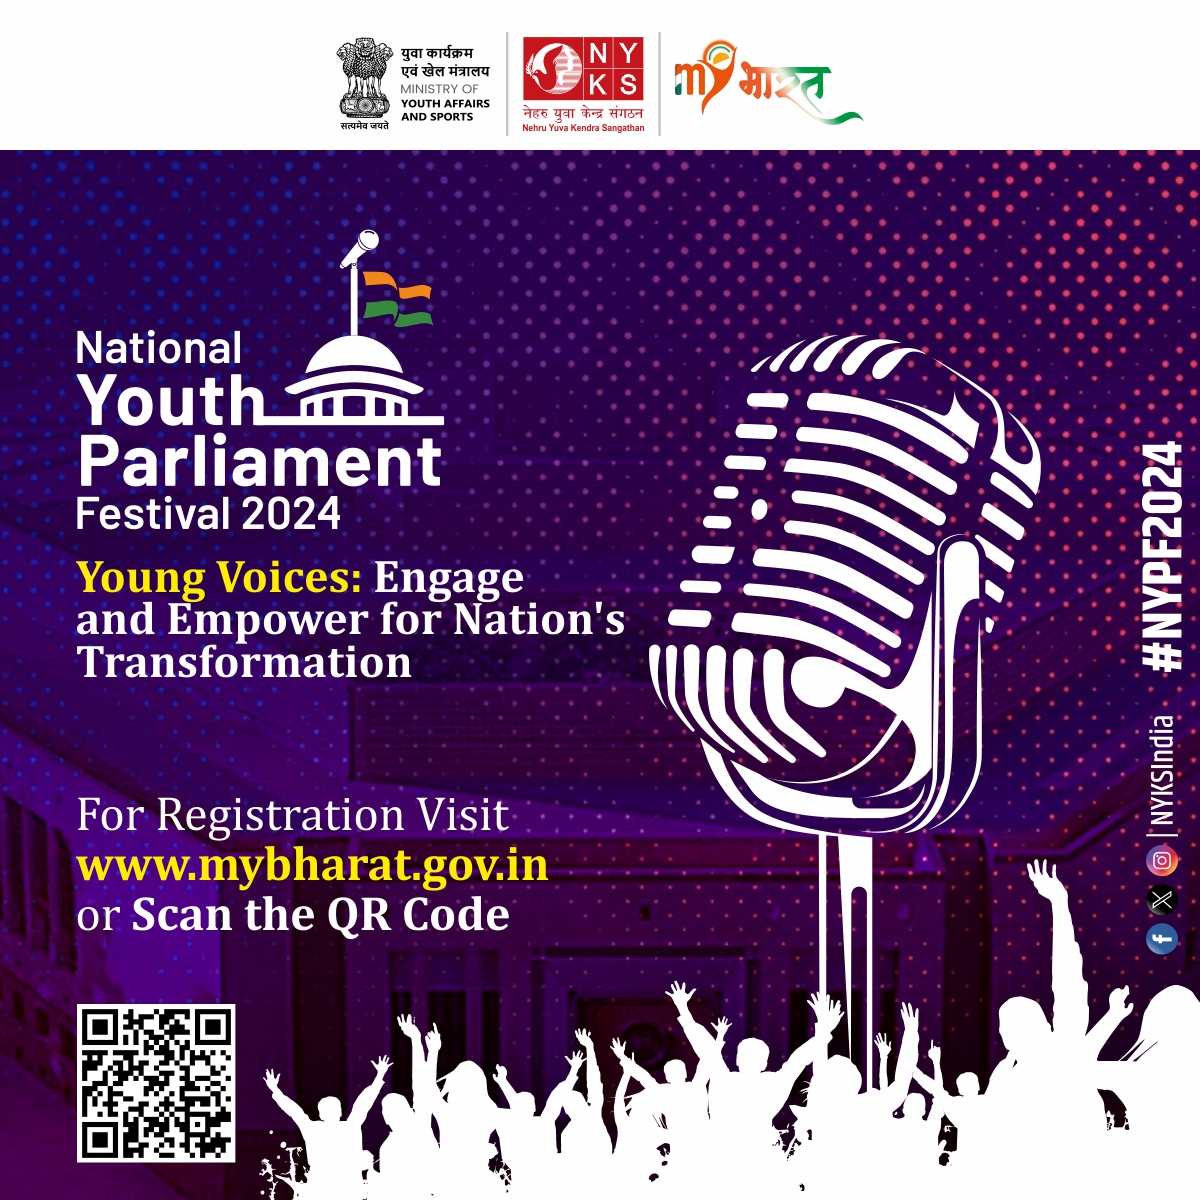 Attention all young changemakers! The National Youth Parliament Festival awaits you. Let's shape the future together! 🌟 Follow us for the latest updates and register today: mybharat.gov.in #YouthLeadership #NYPF2024 #NYKS #YouthEmpowerment